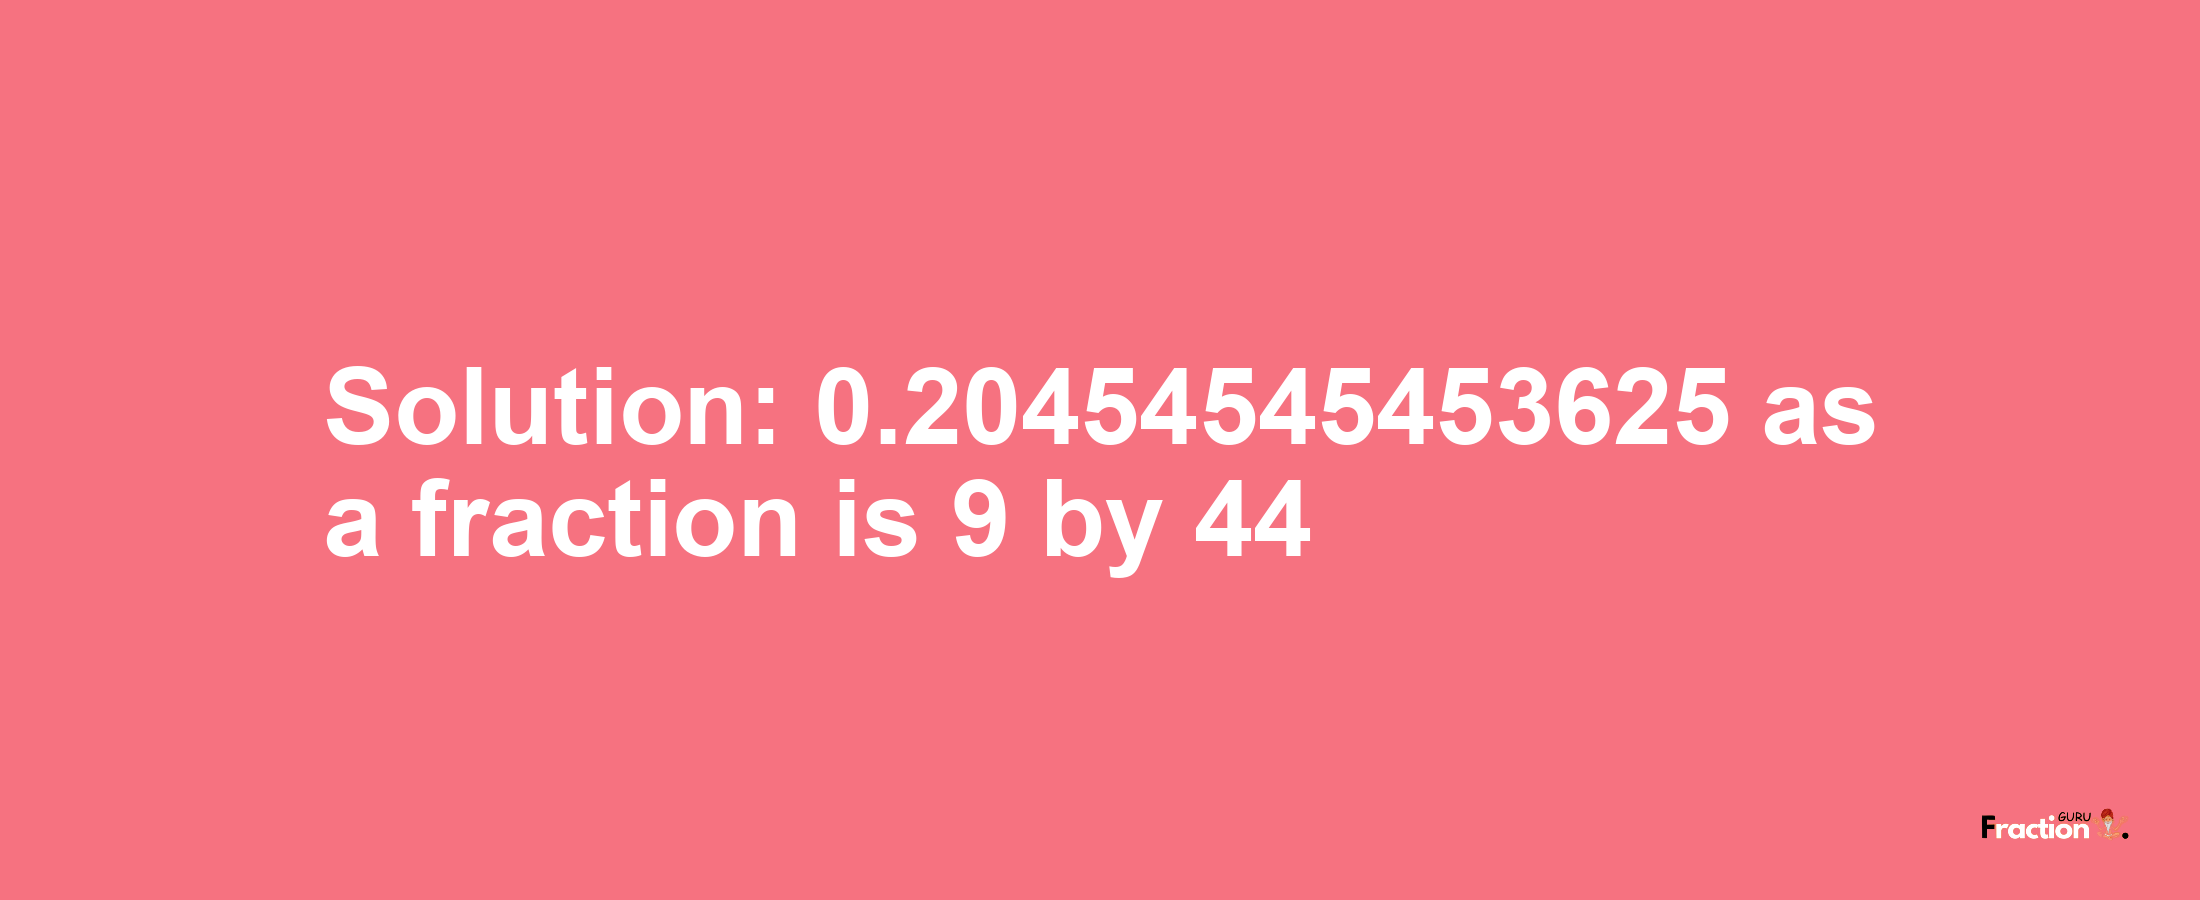 Solution:0.20454545453625 as a fraction is 9/44